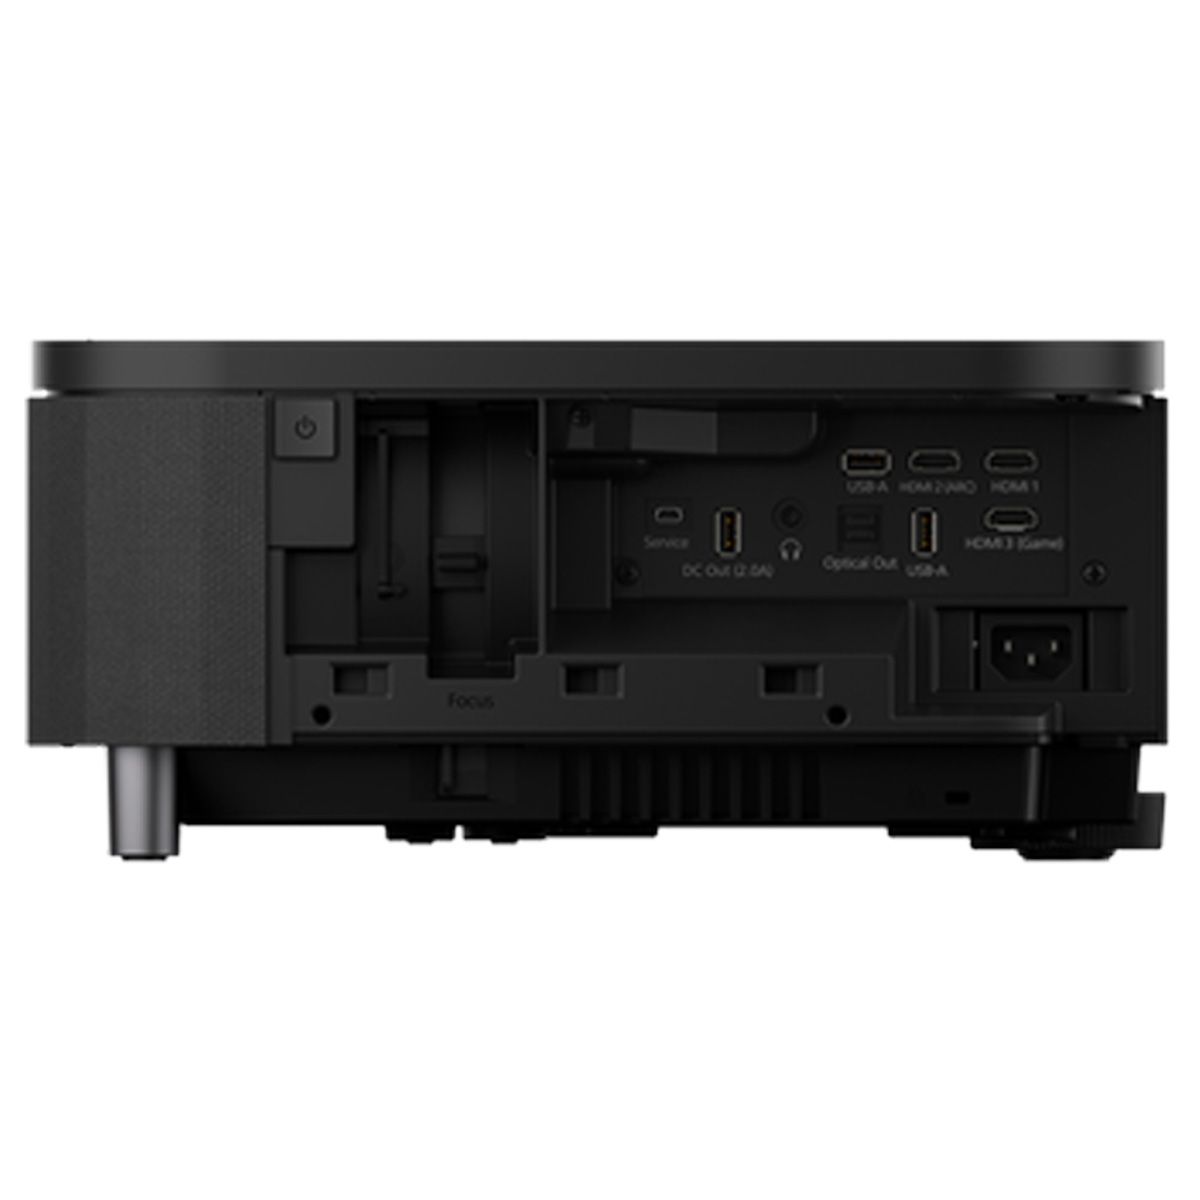 Epson LS800 UST Projector - Black - side view of inputs